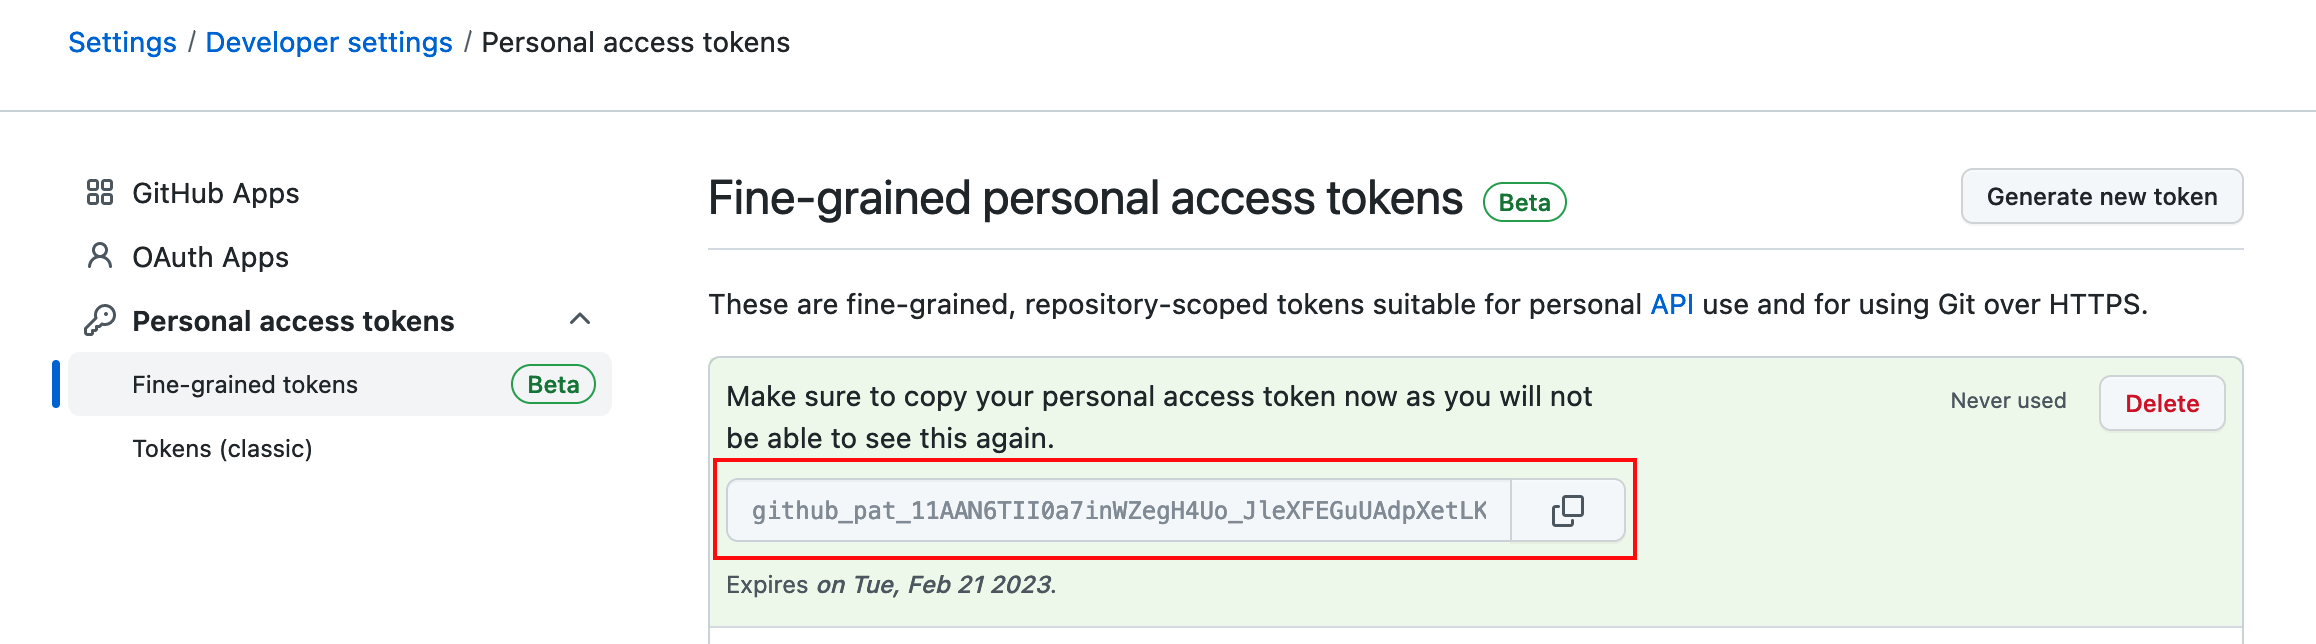 Copy the personal access token as it will only be displayed once.